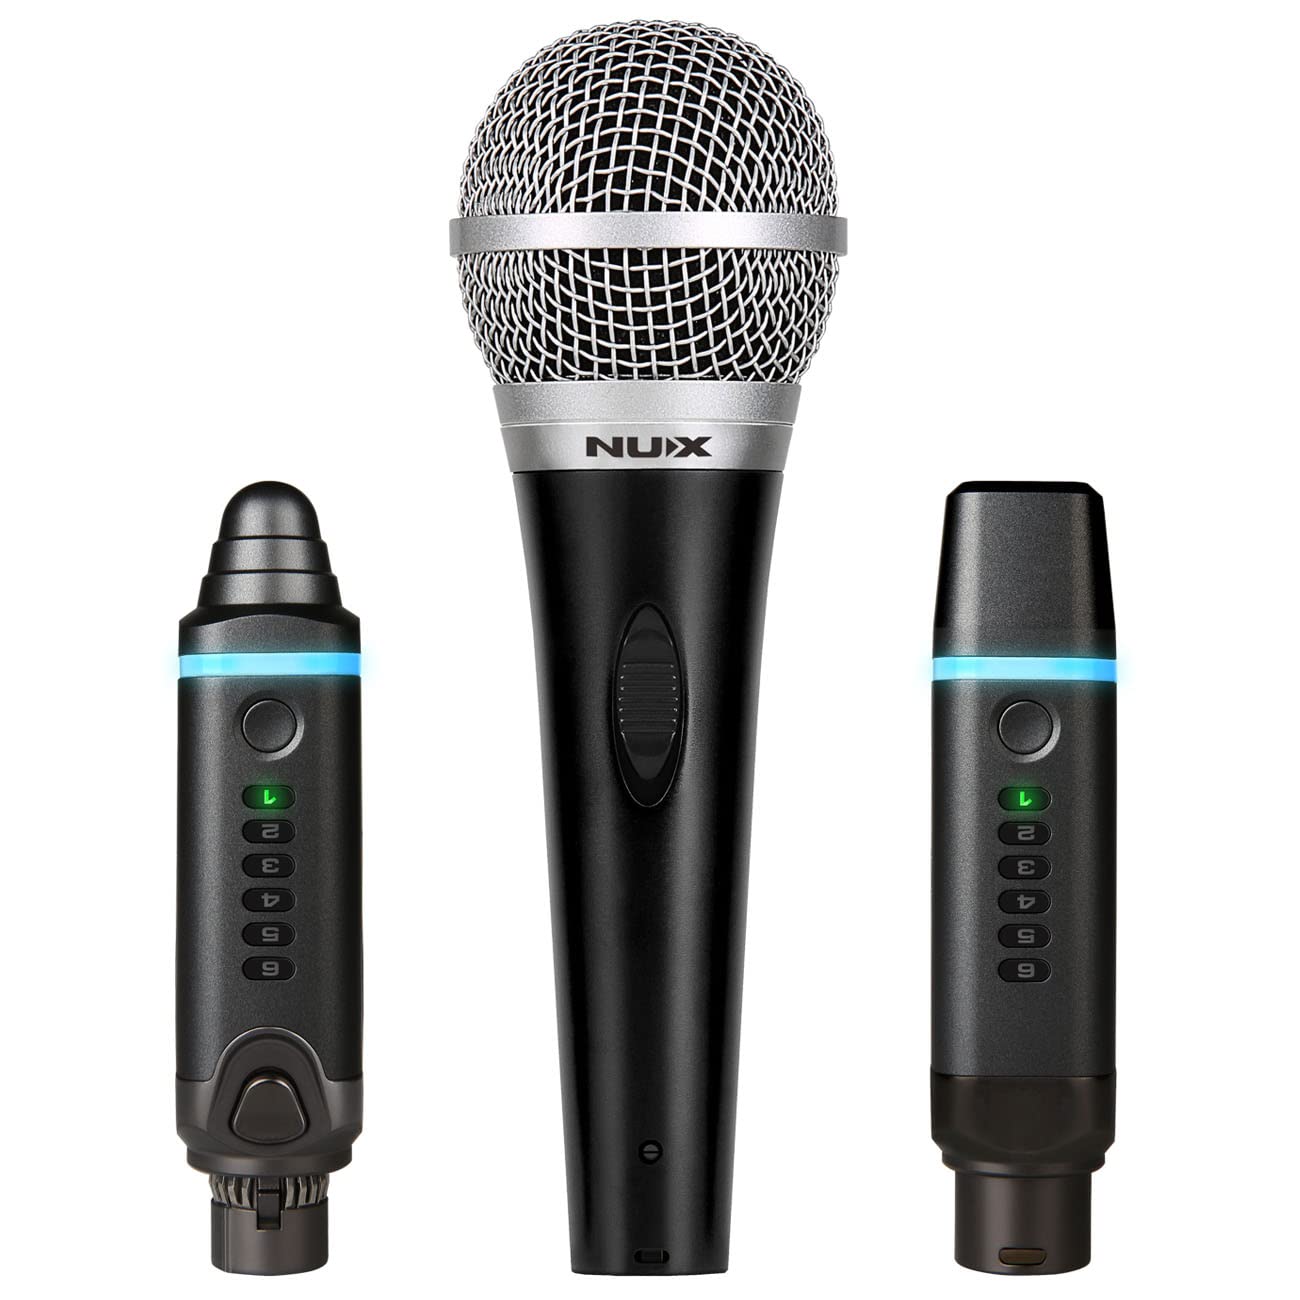 NUX - B-3 Plus with Microphone Wireless Microphone System for XLR Dynamic Microphone